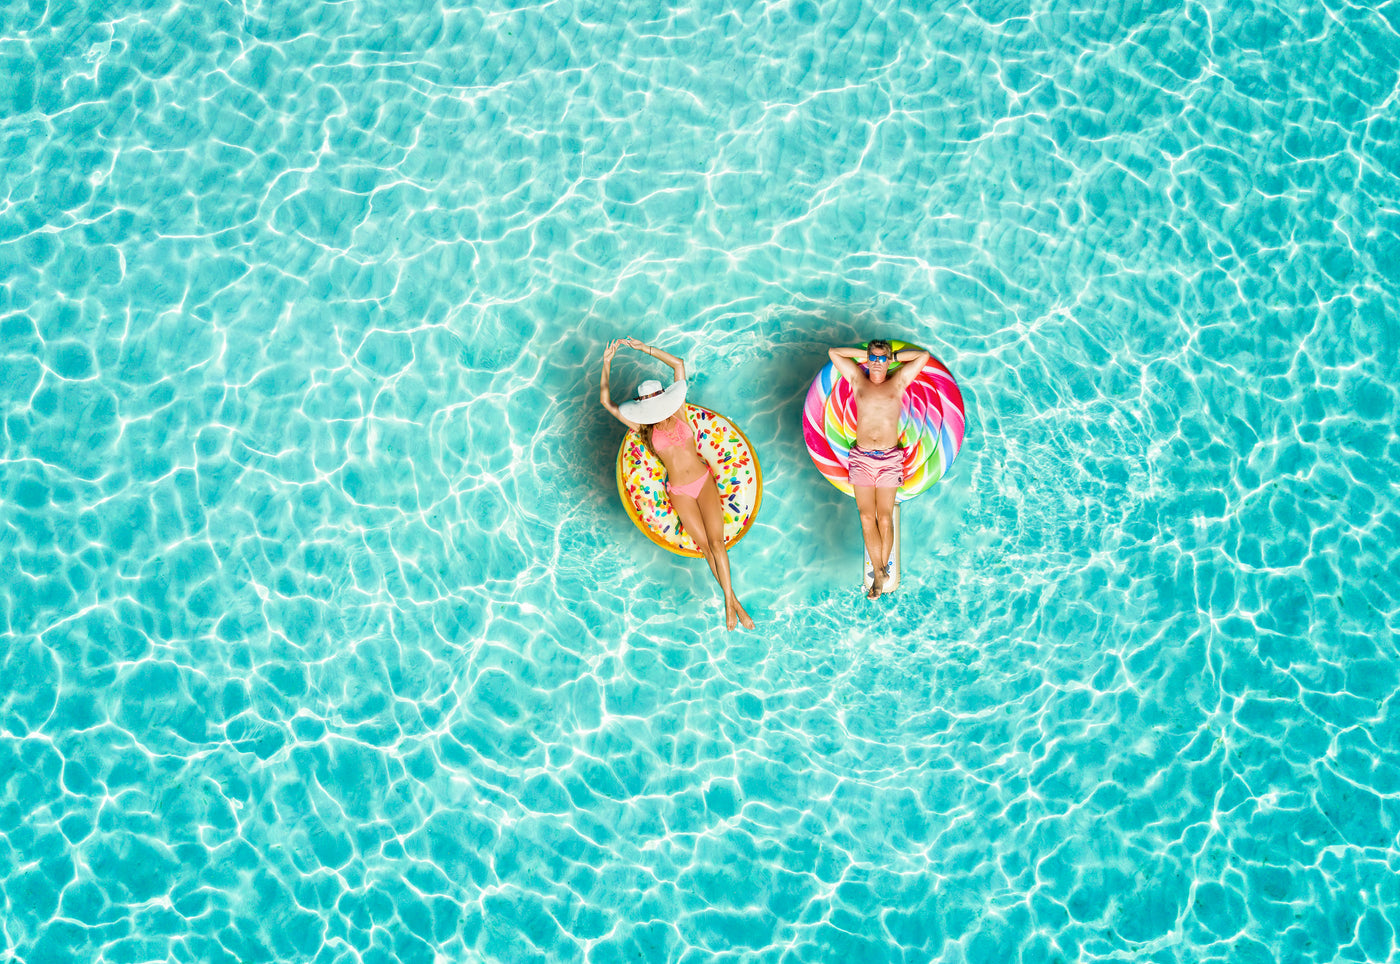  Couple floating in a pool